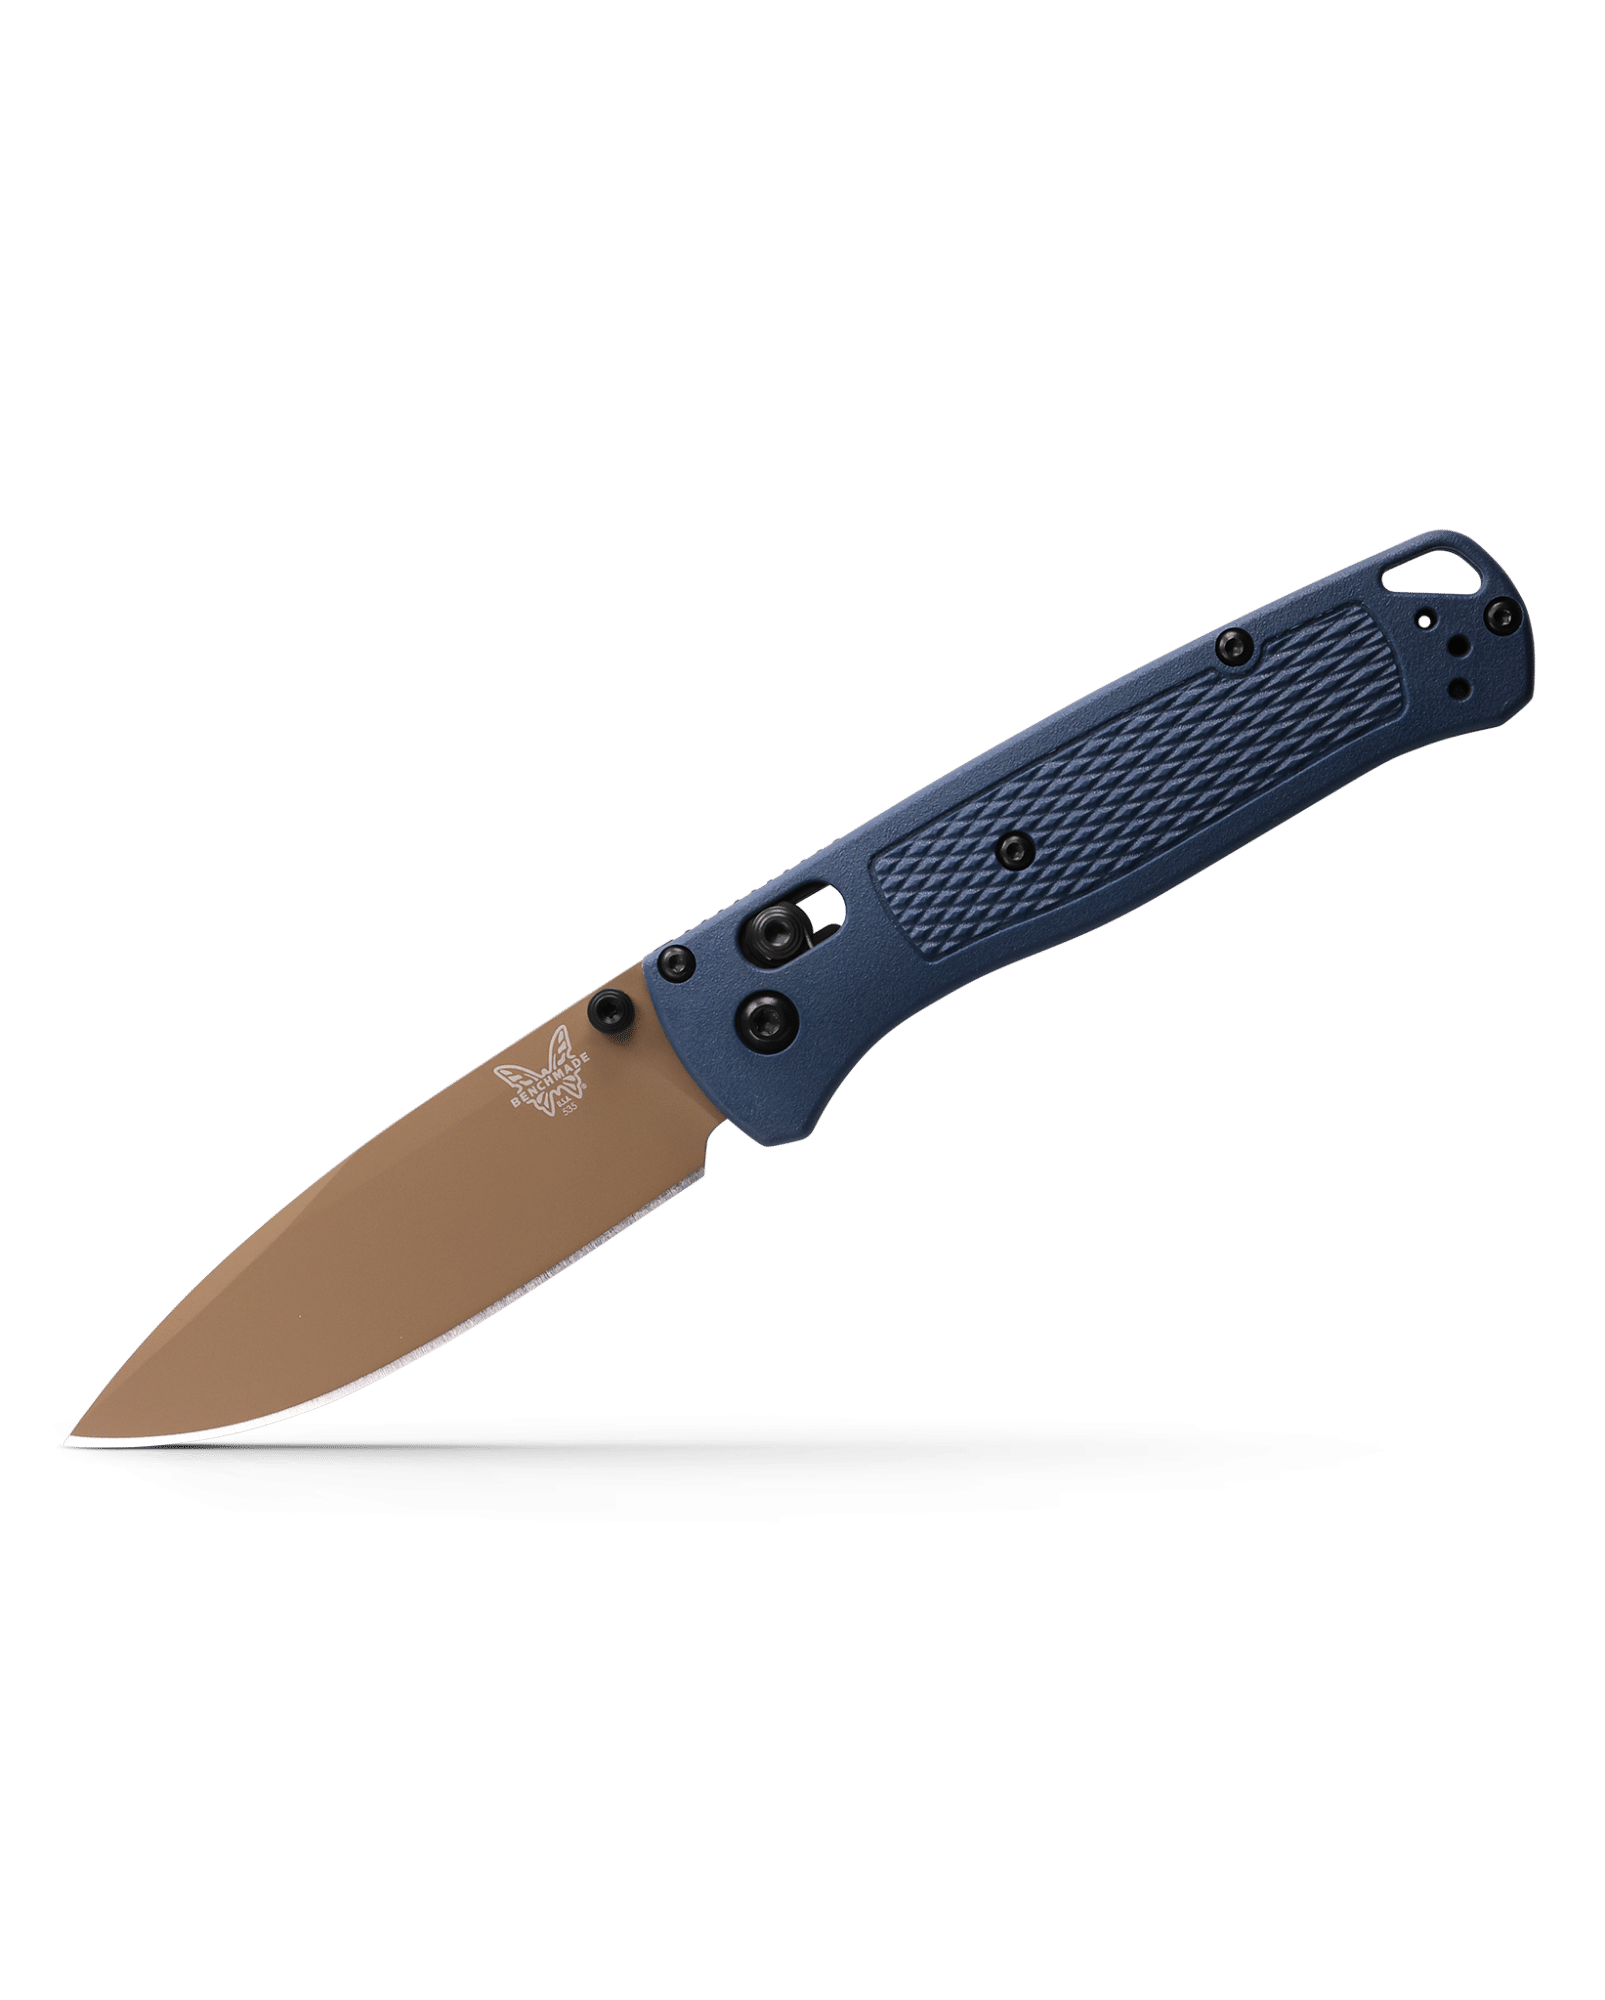 https://cityarsenal.com/product/benchmade-bugout-knife-fde-blade-crater-blue-grivory-handle-535fe-05/